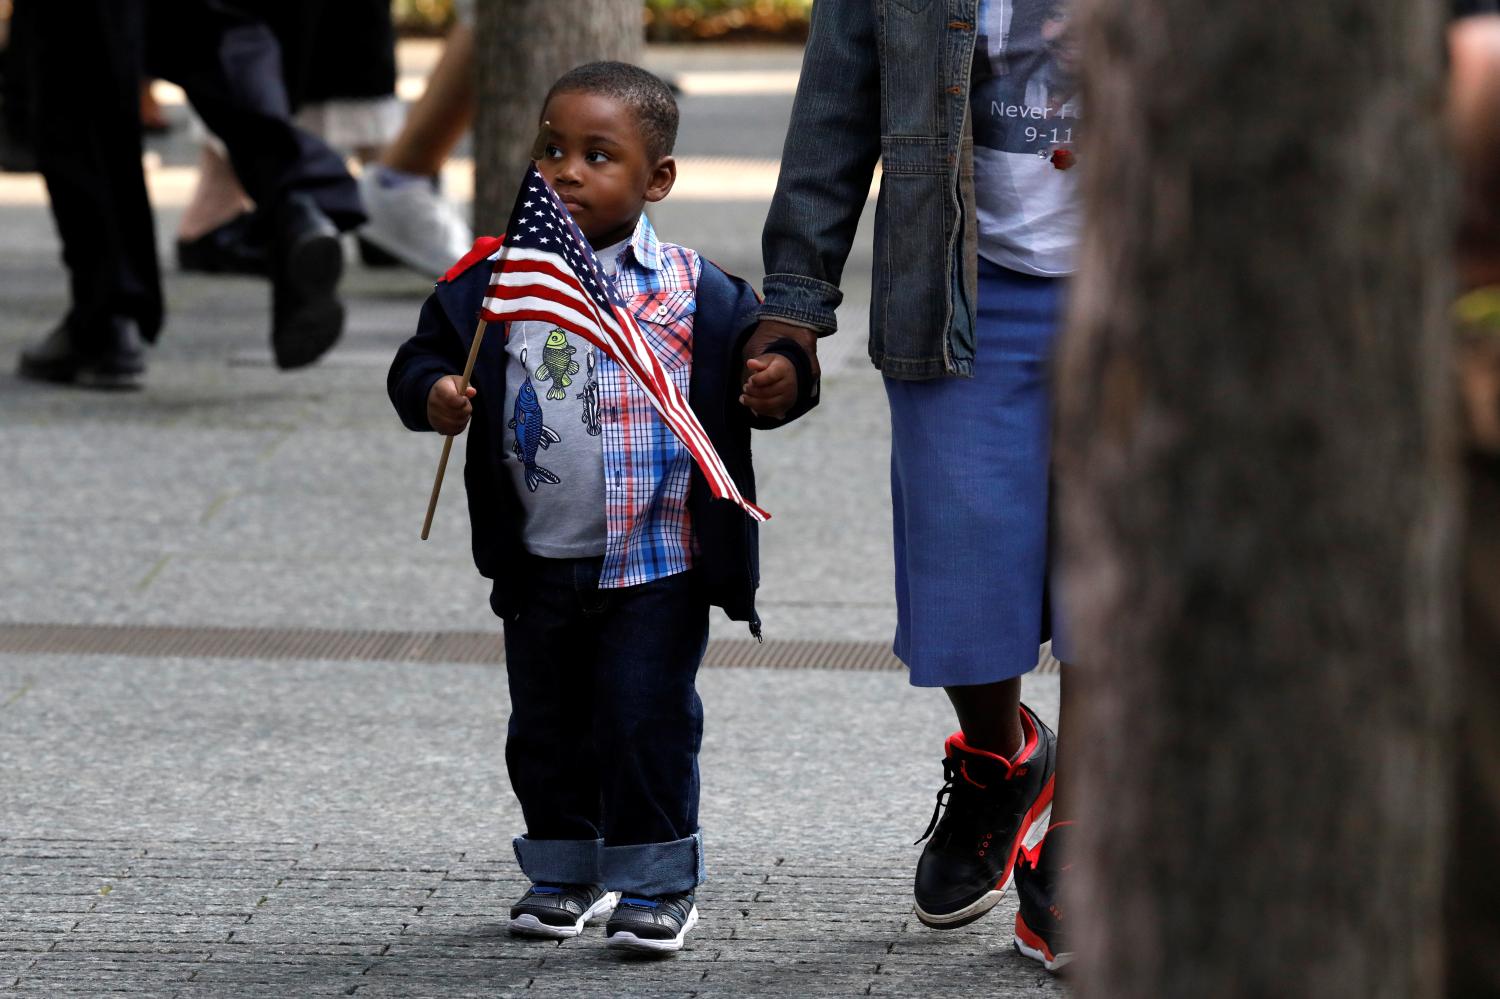 A young boy of color carries an American flag